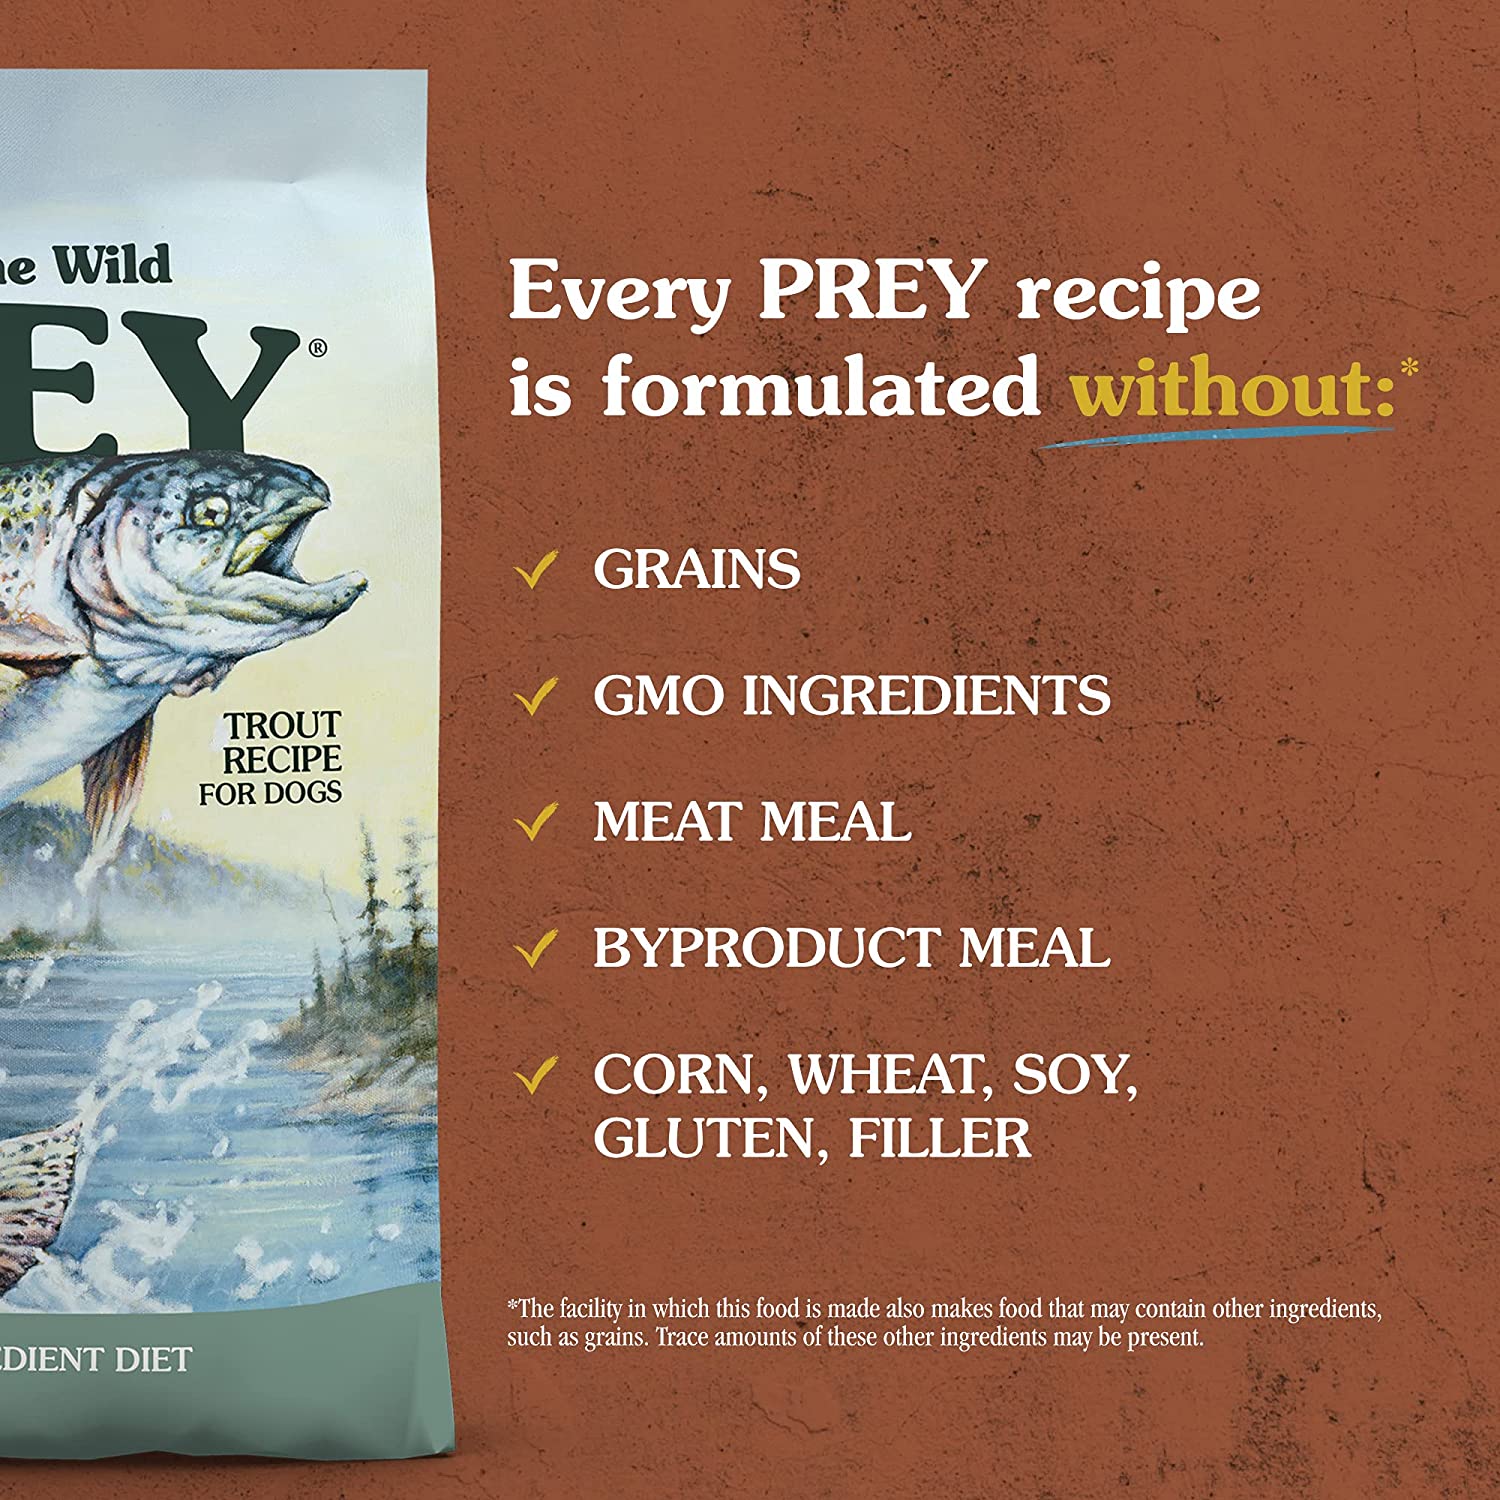 Taste of the Wild PREY High Protein Limited Ingredient Premium Dry Dog Food with Antioxidants and Probiotics for All Life Stages